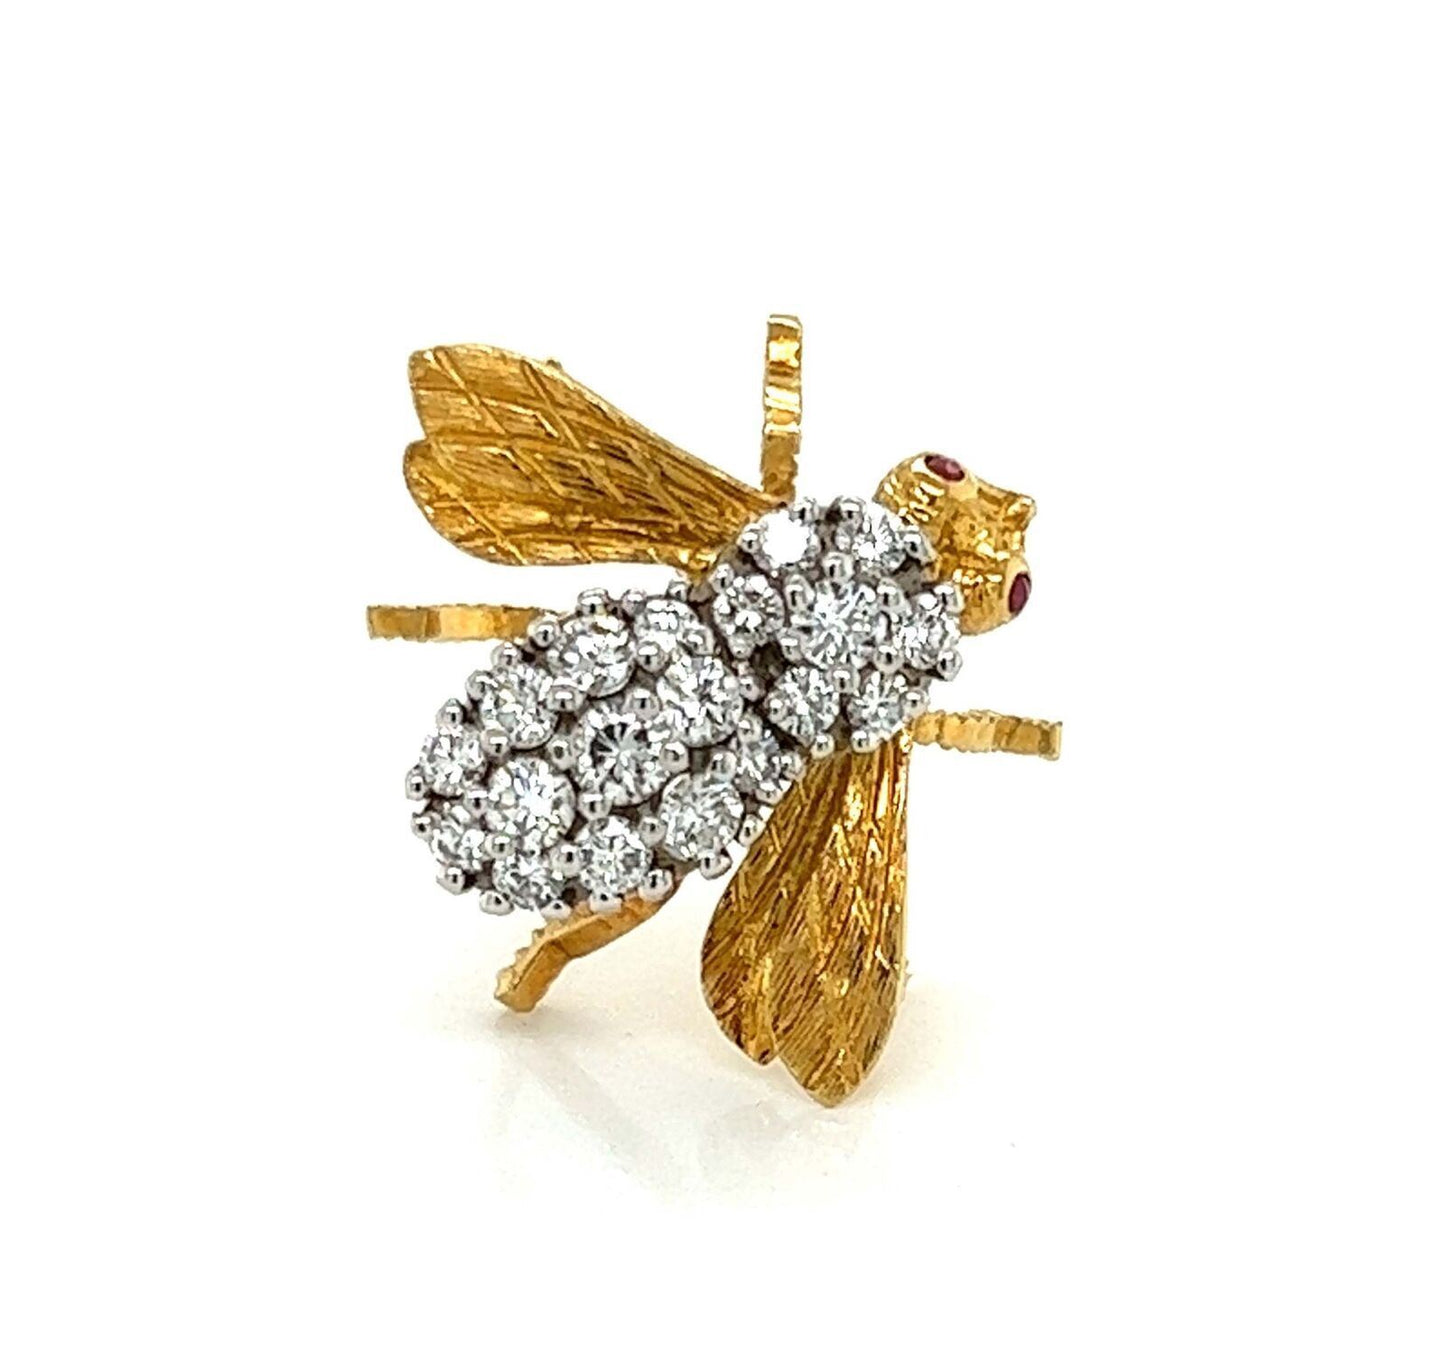 Herbert Rosenthal Diamond Ruby 18k Yellow White Gold Bee Pin Brooch | brooches | Brooches, catalog, Designer Jewelry, herbert rosenthal, pins | Herbert Rosenthal